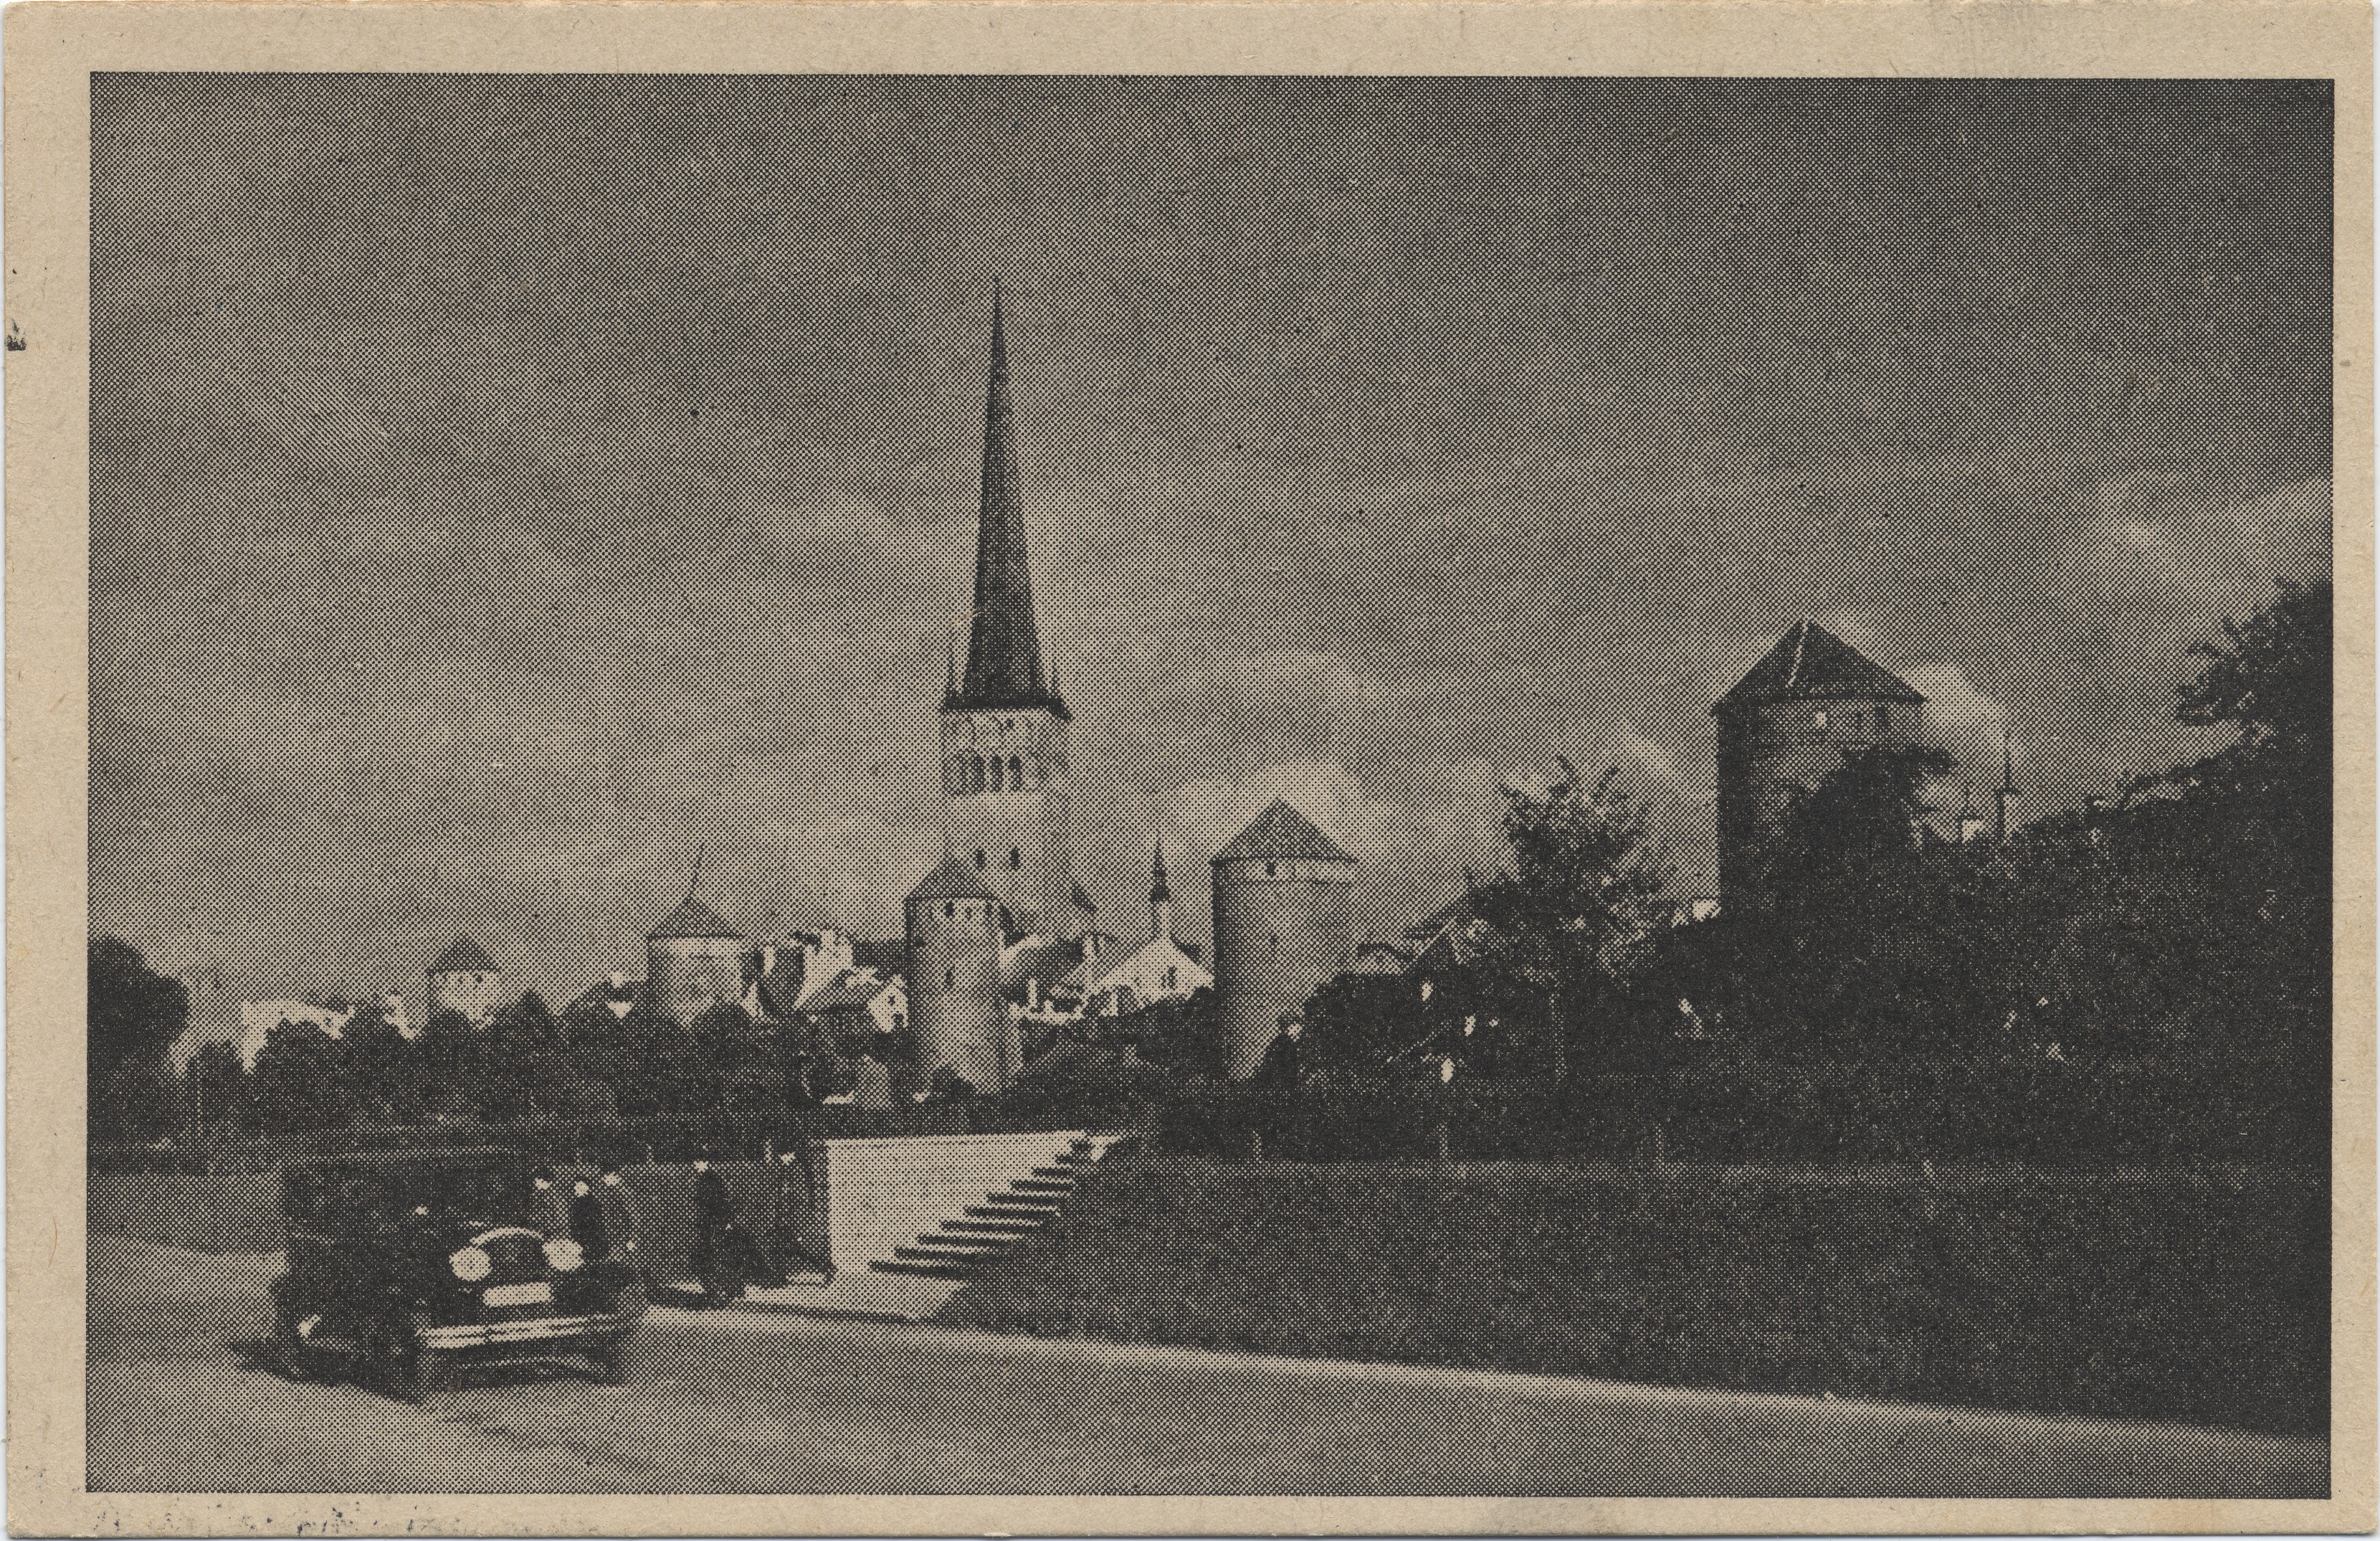 Reval : the place of the towers and the Olaikirche = Tallinn : Tower Square and Oleviste Church